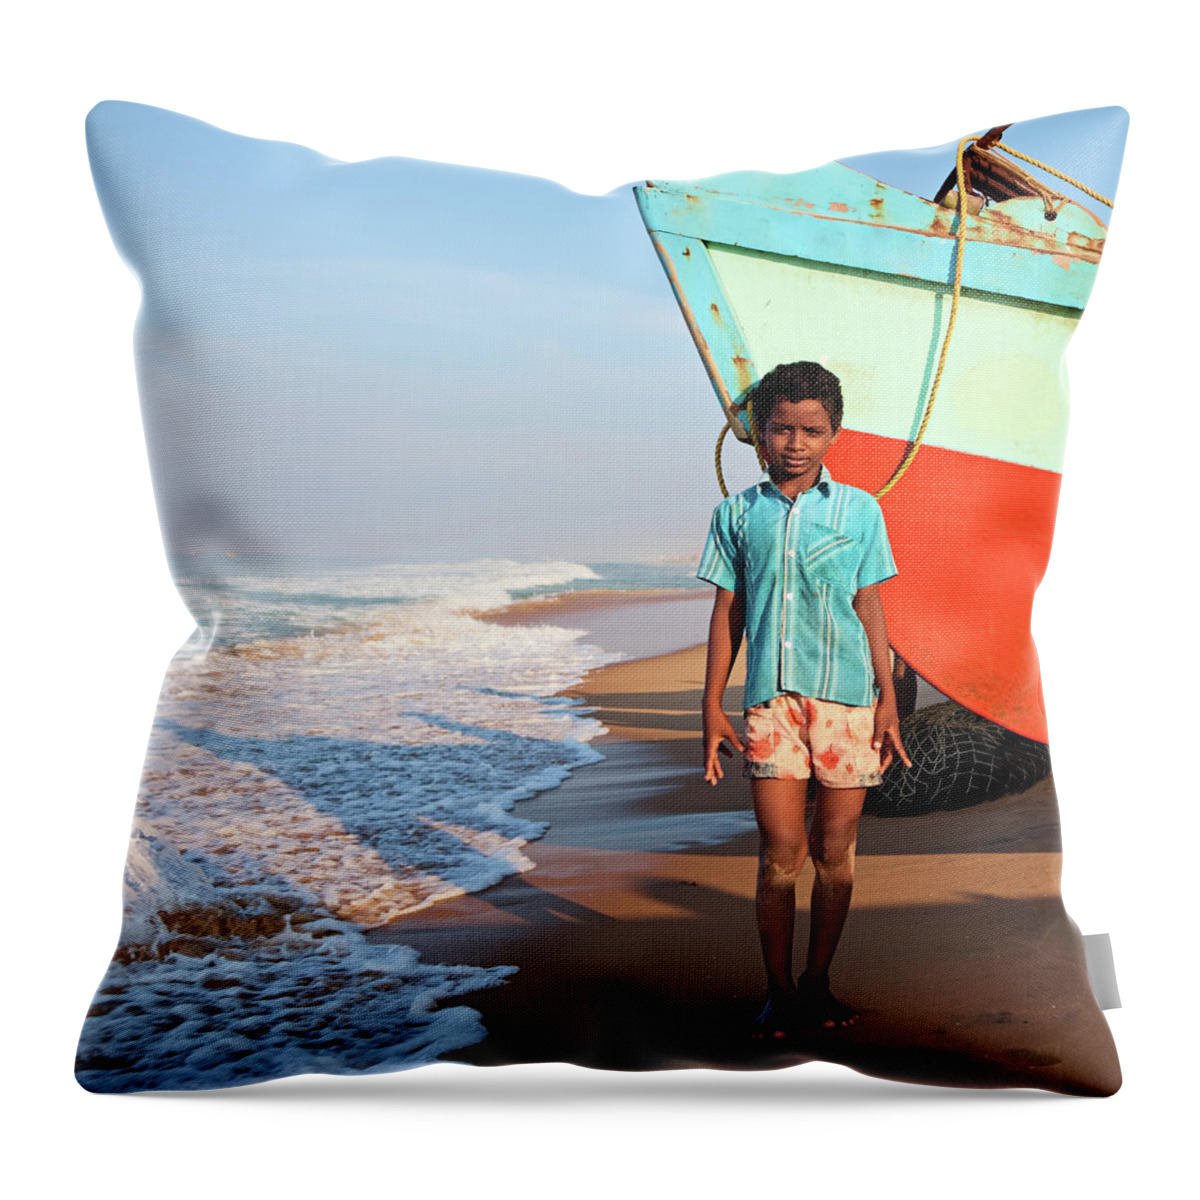 Water's Edge Throw Pillow featuring the photograph Indian Boy On The Beach by Hadynyah